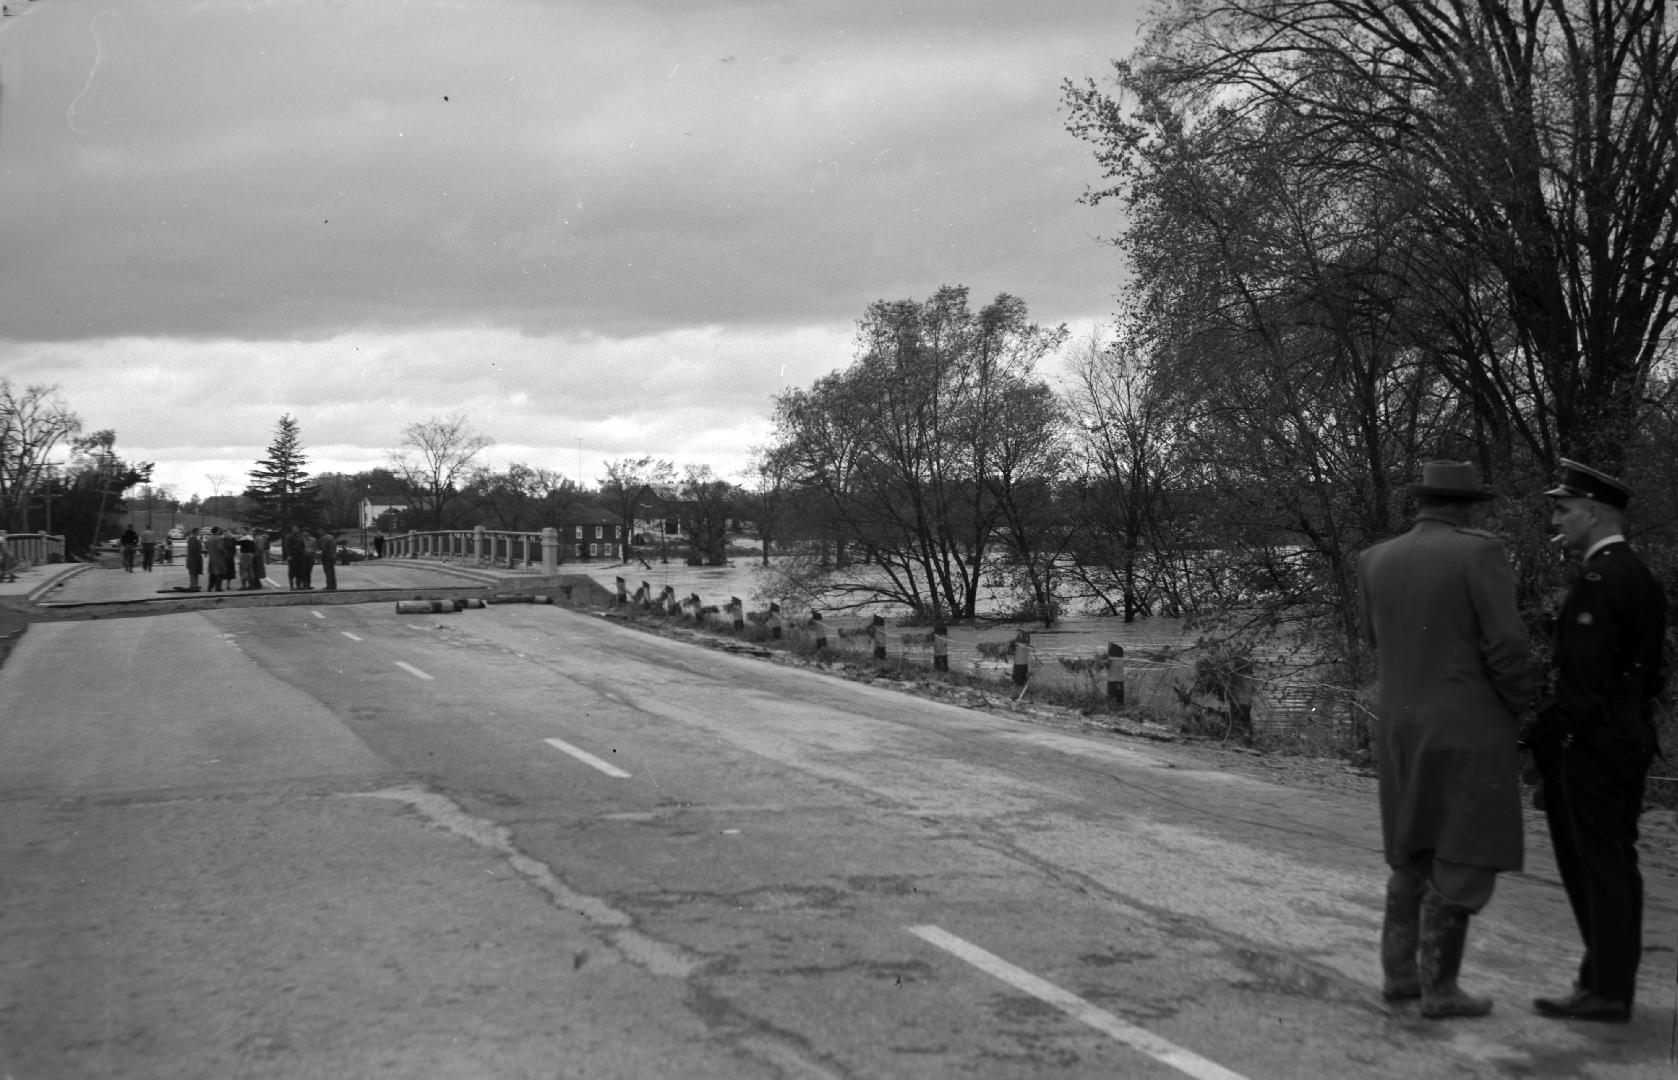 Humber River, Albion Road., looking northwest to bridge over Humber River